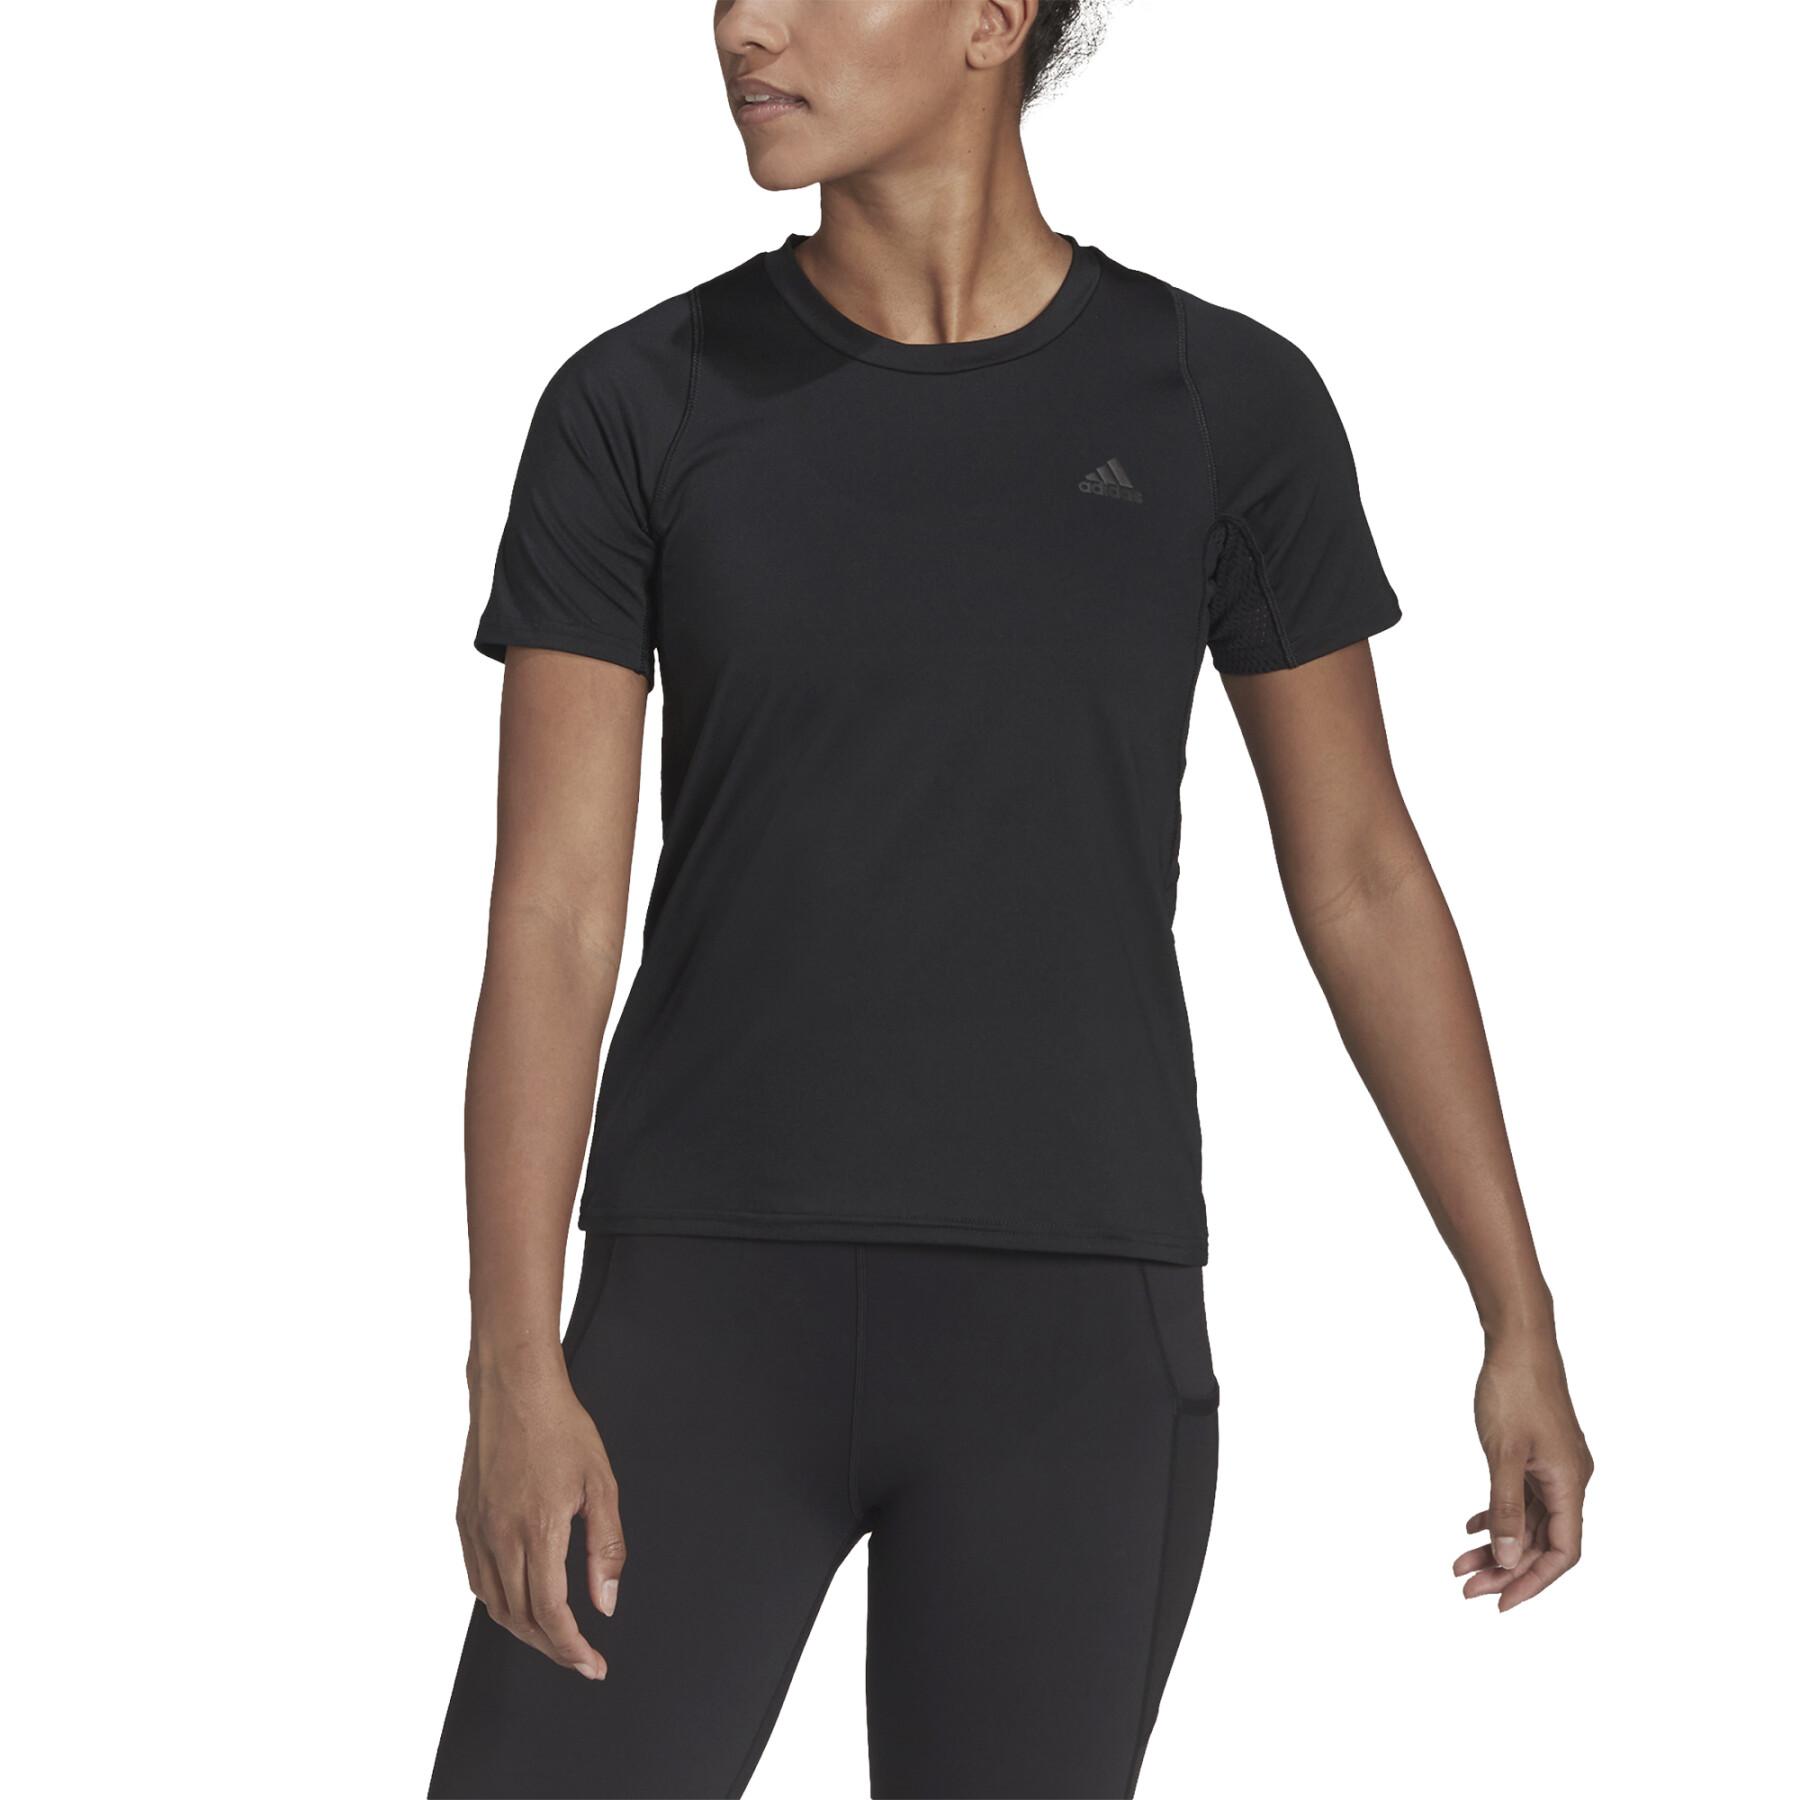 Women's T-shirt adidas Run Fast Made With Parley Ocean Plastic